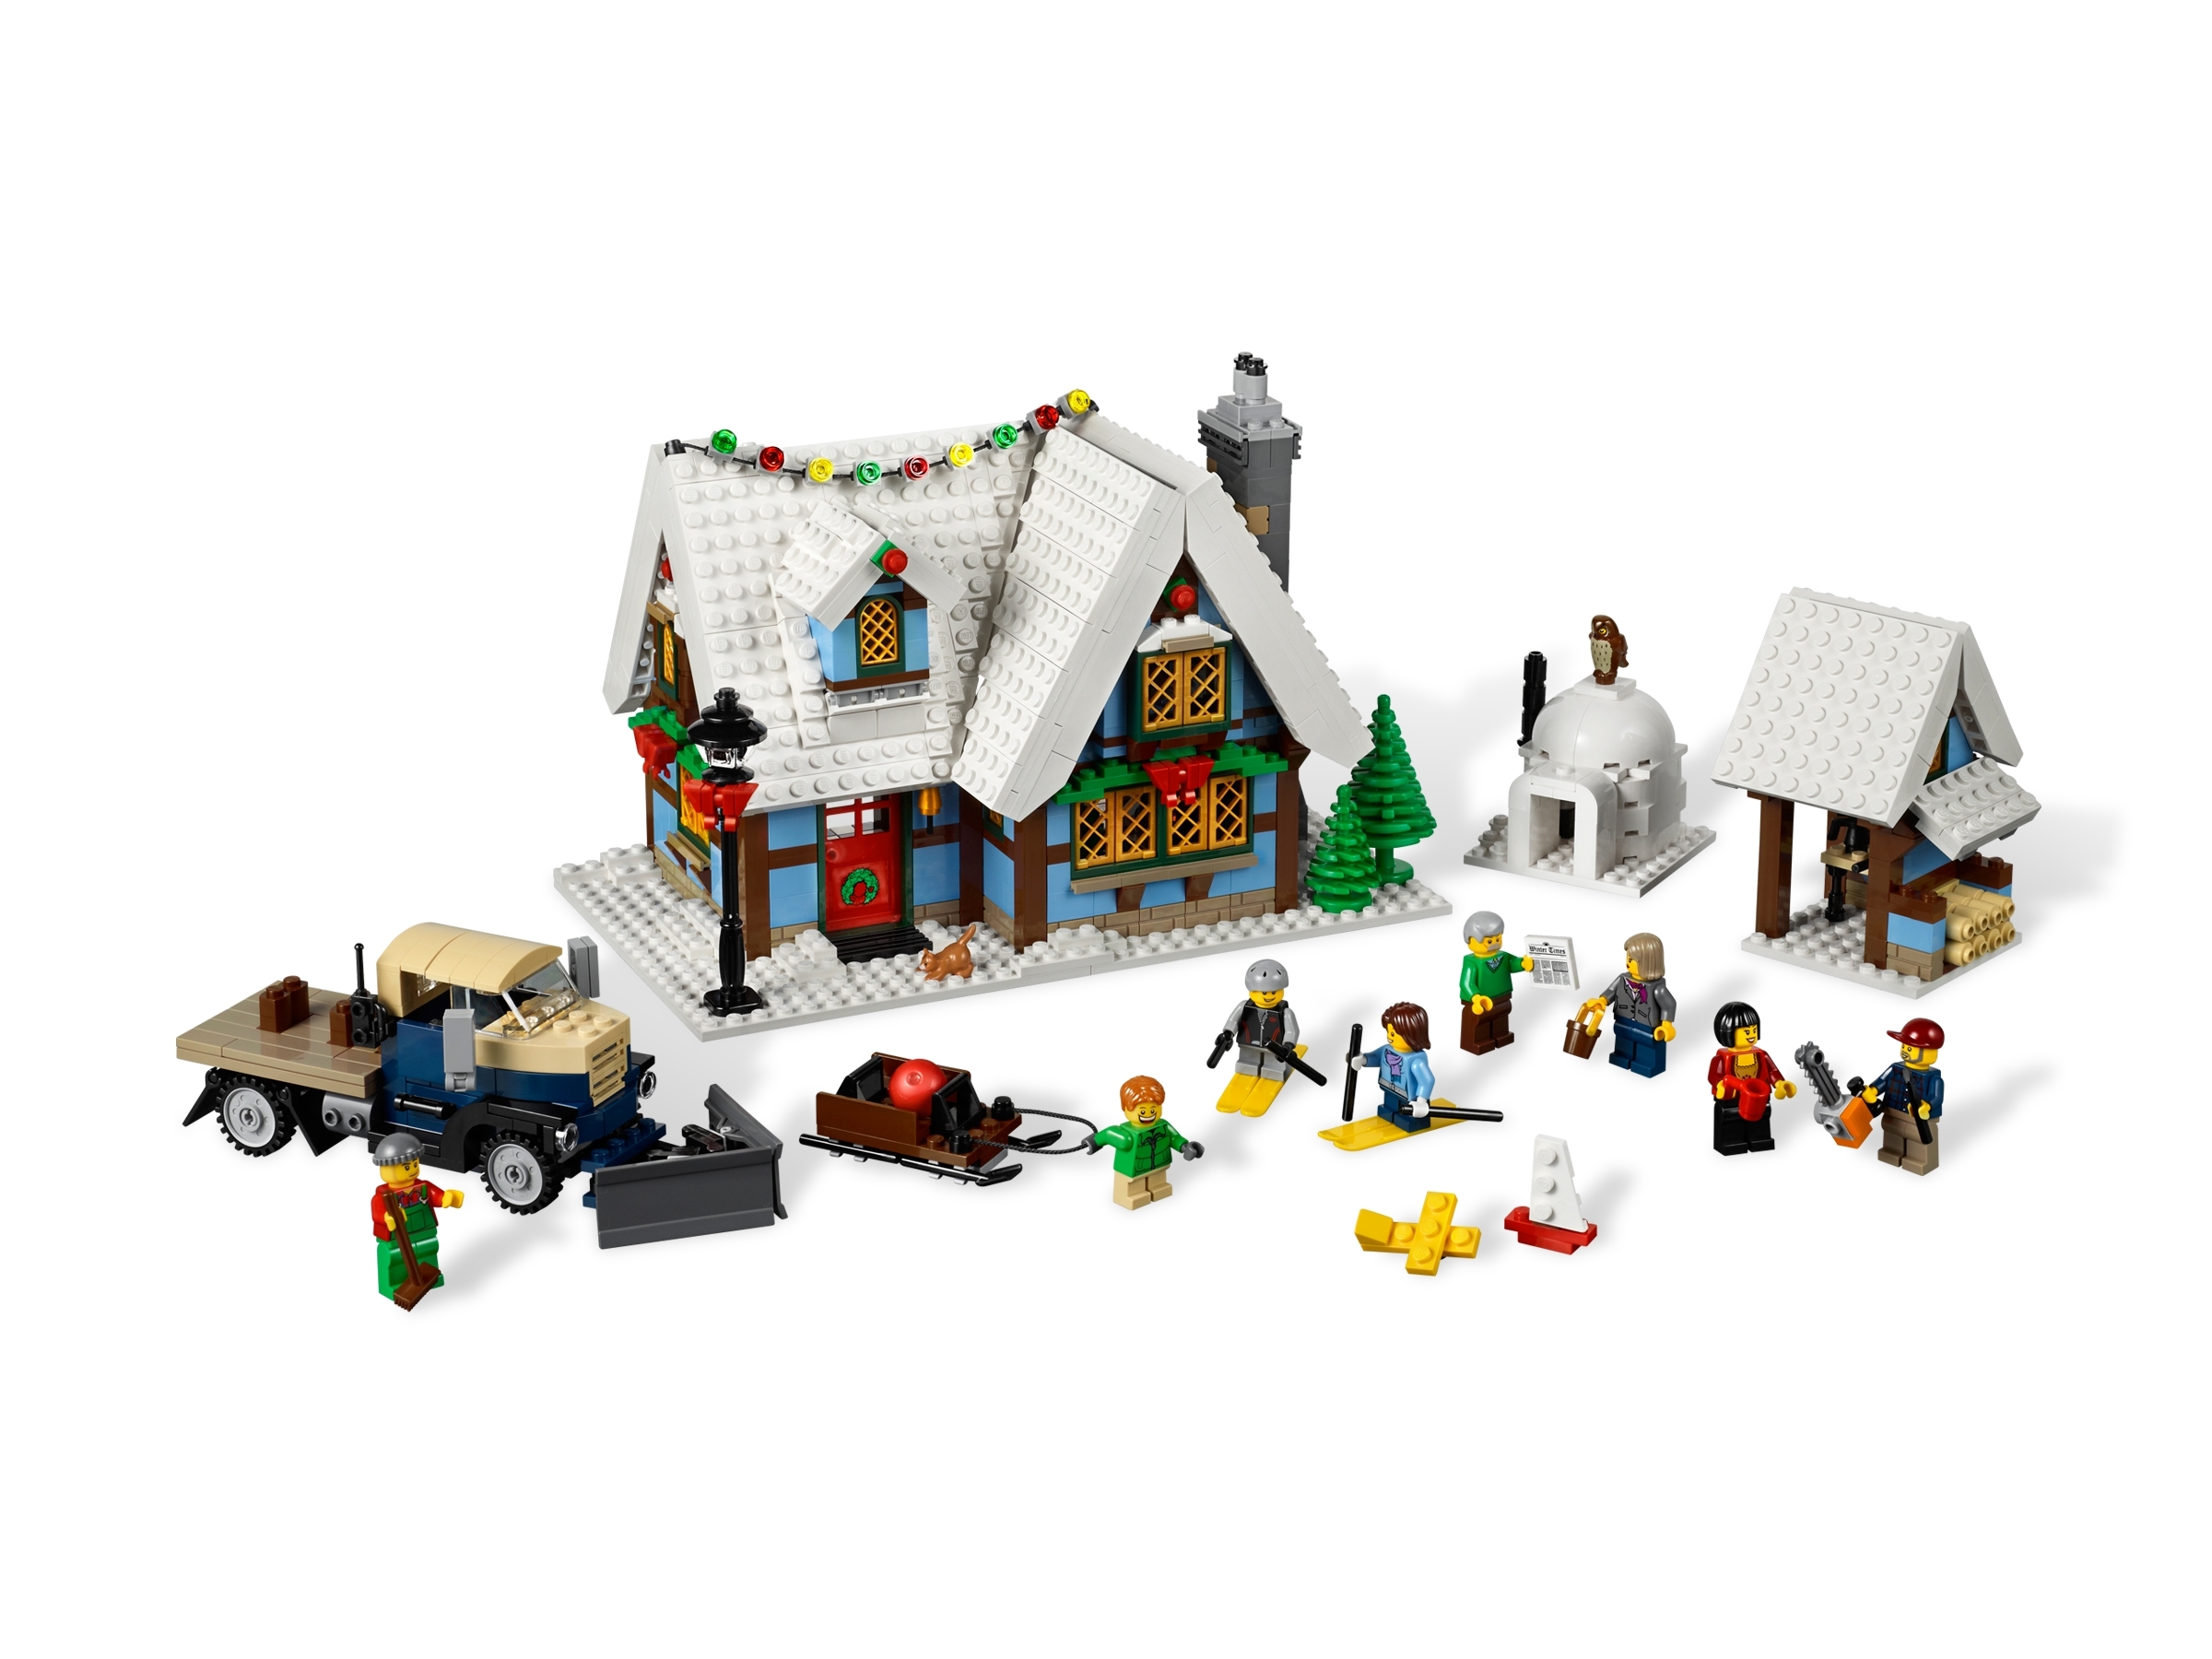 Music and Steam Chimney Winter Modular House Compatible with LEGO Christmas LOSGO Christmas House Building Kit with Light 3693 Pcs 